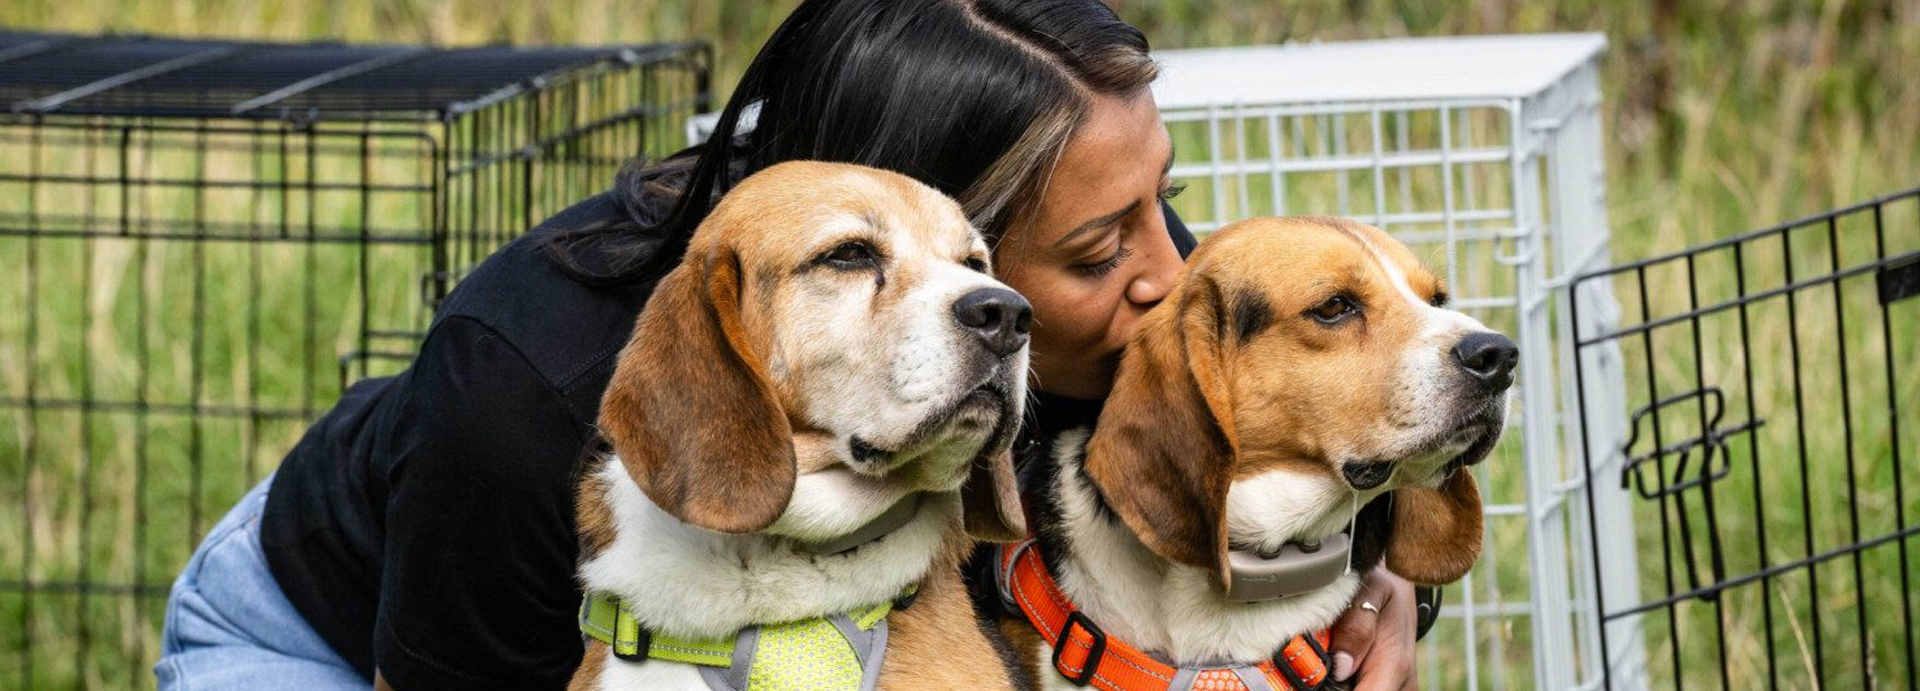 Rescued beagles get first taste of freedom